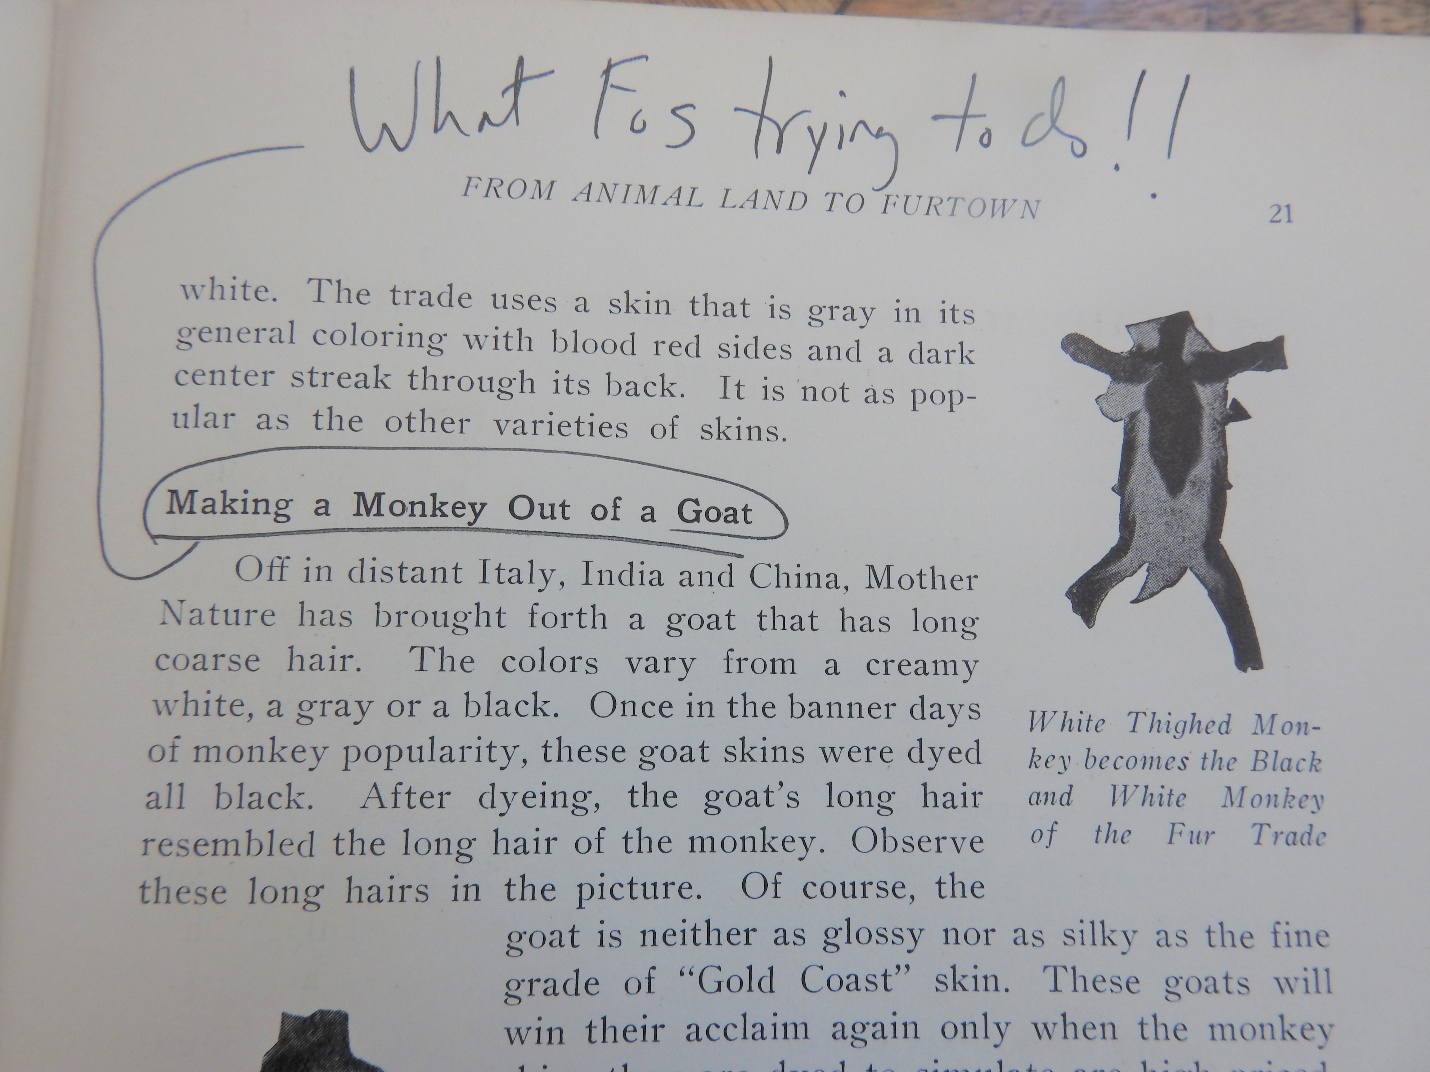 Photograph of a page from a book. The annotation at the top saying 'What FoS trying to do!!' connects to the circled section heading, 'Making a Monkey Out of a Goat'.